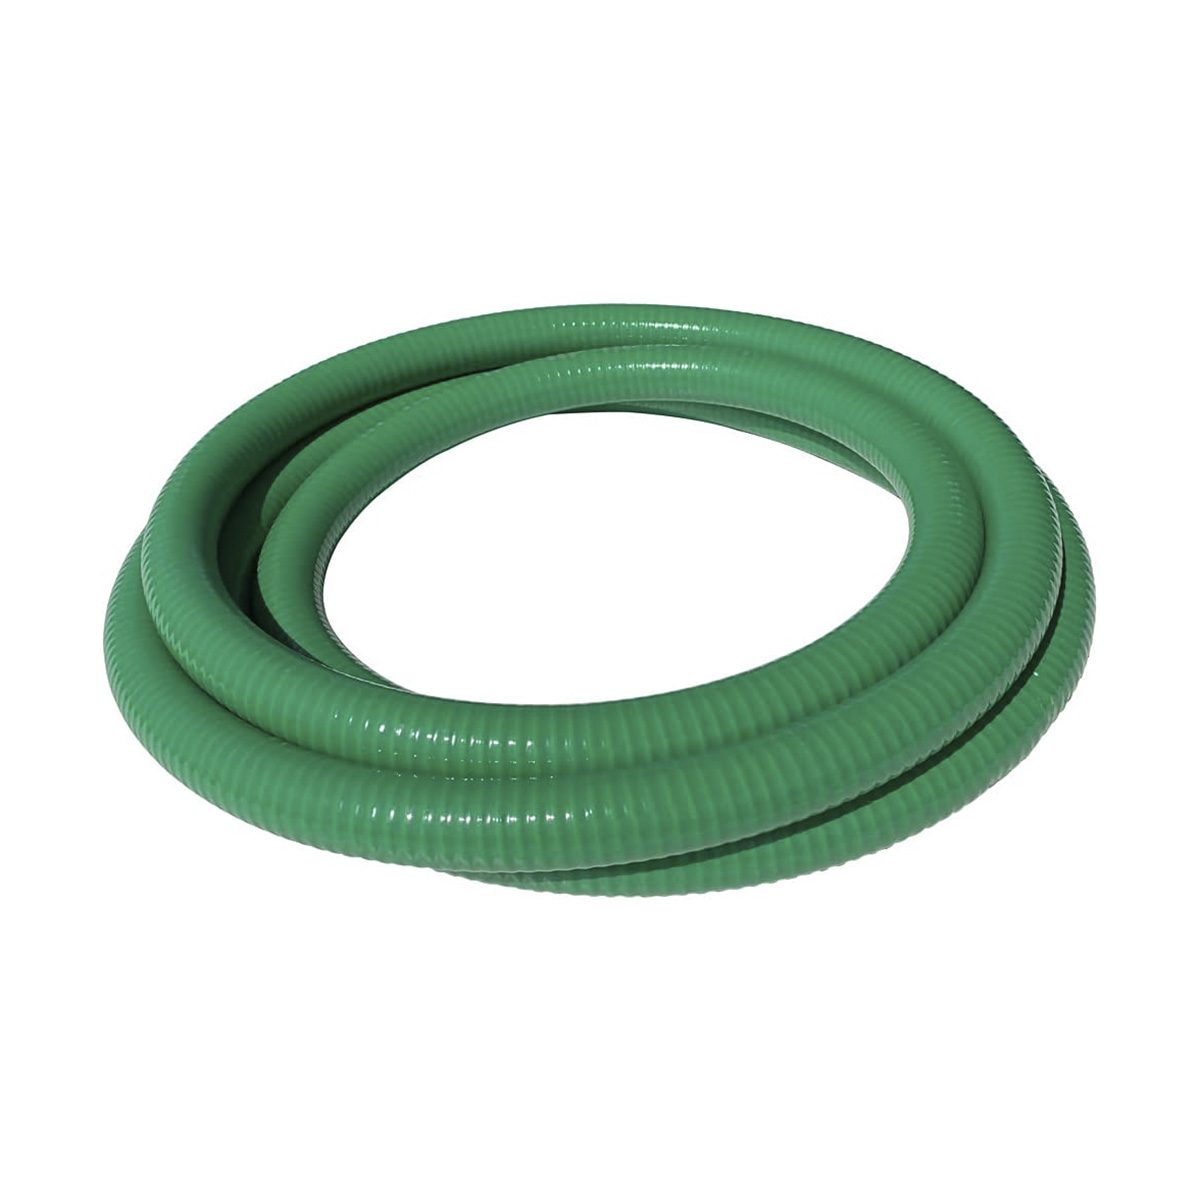 1-1/2" X 75' Clear PVC Suction Hose Assembly with 1-1/2" M&F Camlock Fittings 